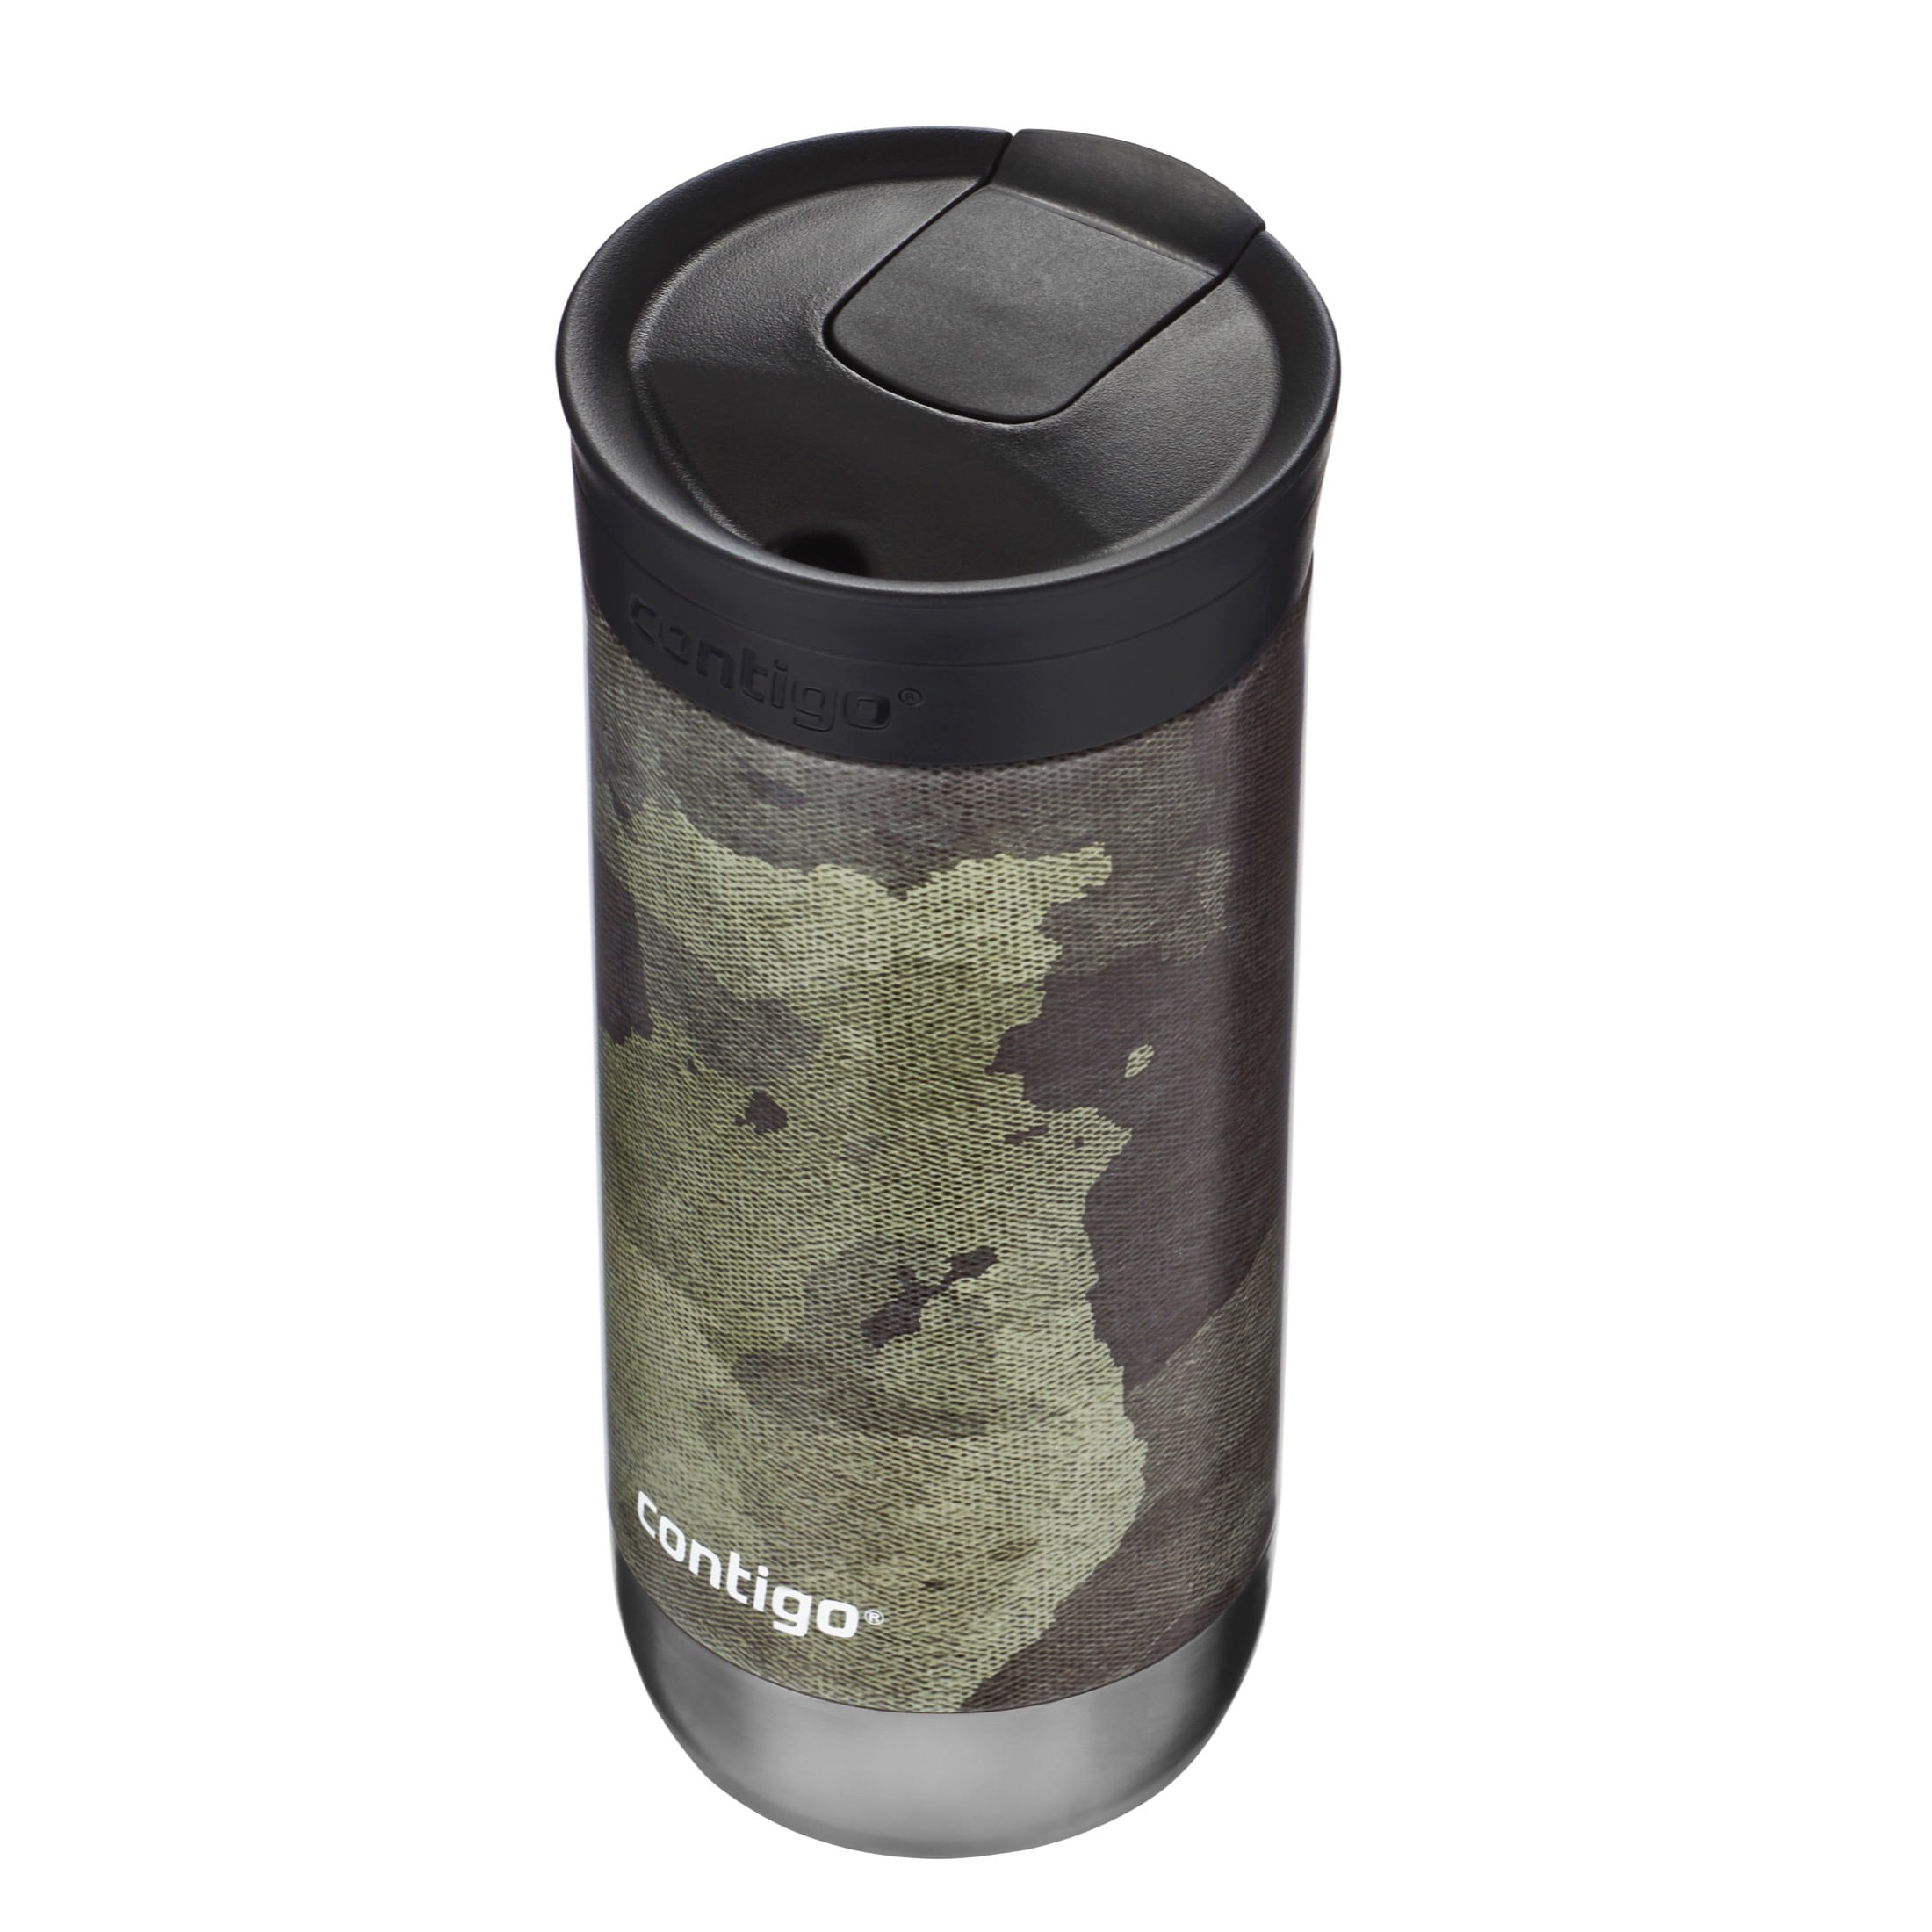 Custom Camo 20oz Travel Mug - Personalized Stainless Steel Insulated  Tumbler Camouflage Cup for Warm…See more Custom Camo 20oz Travel Mug 